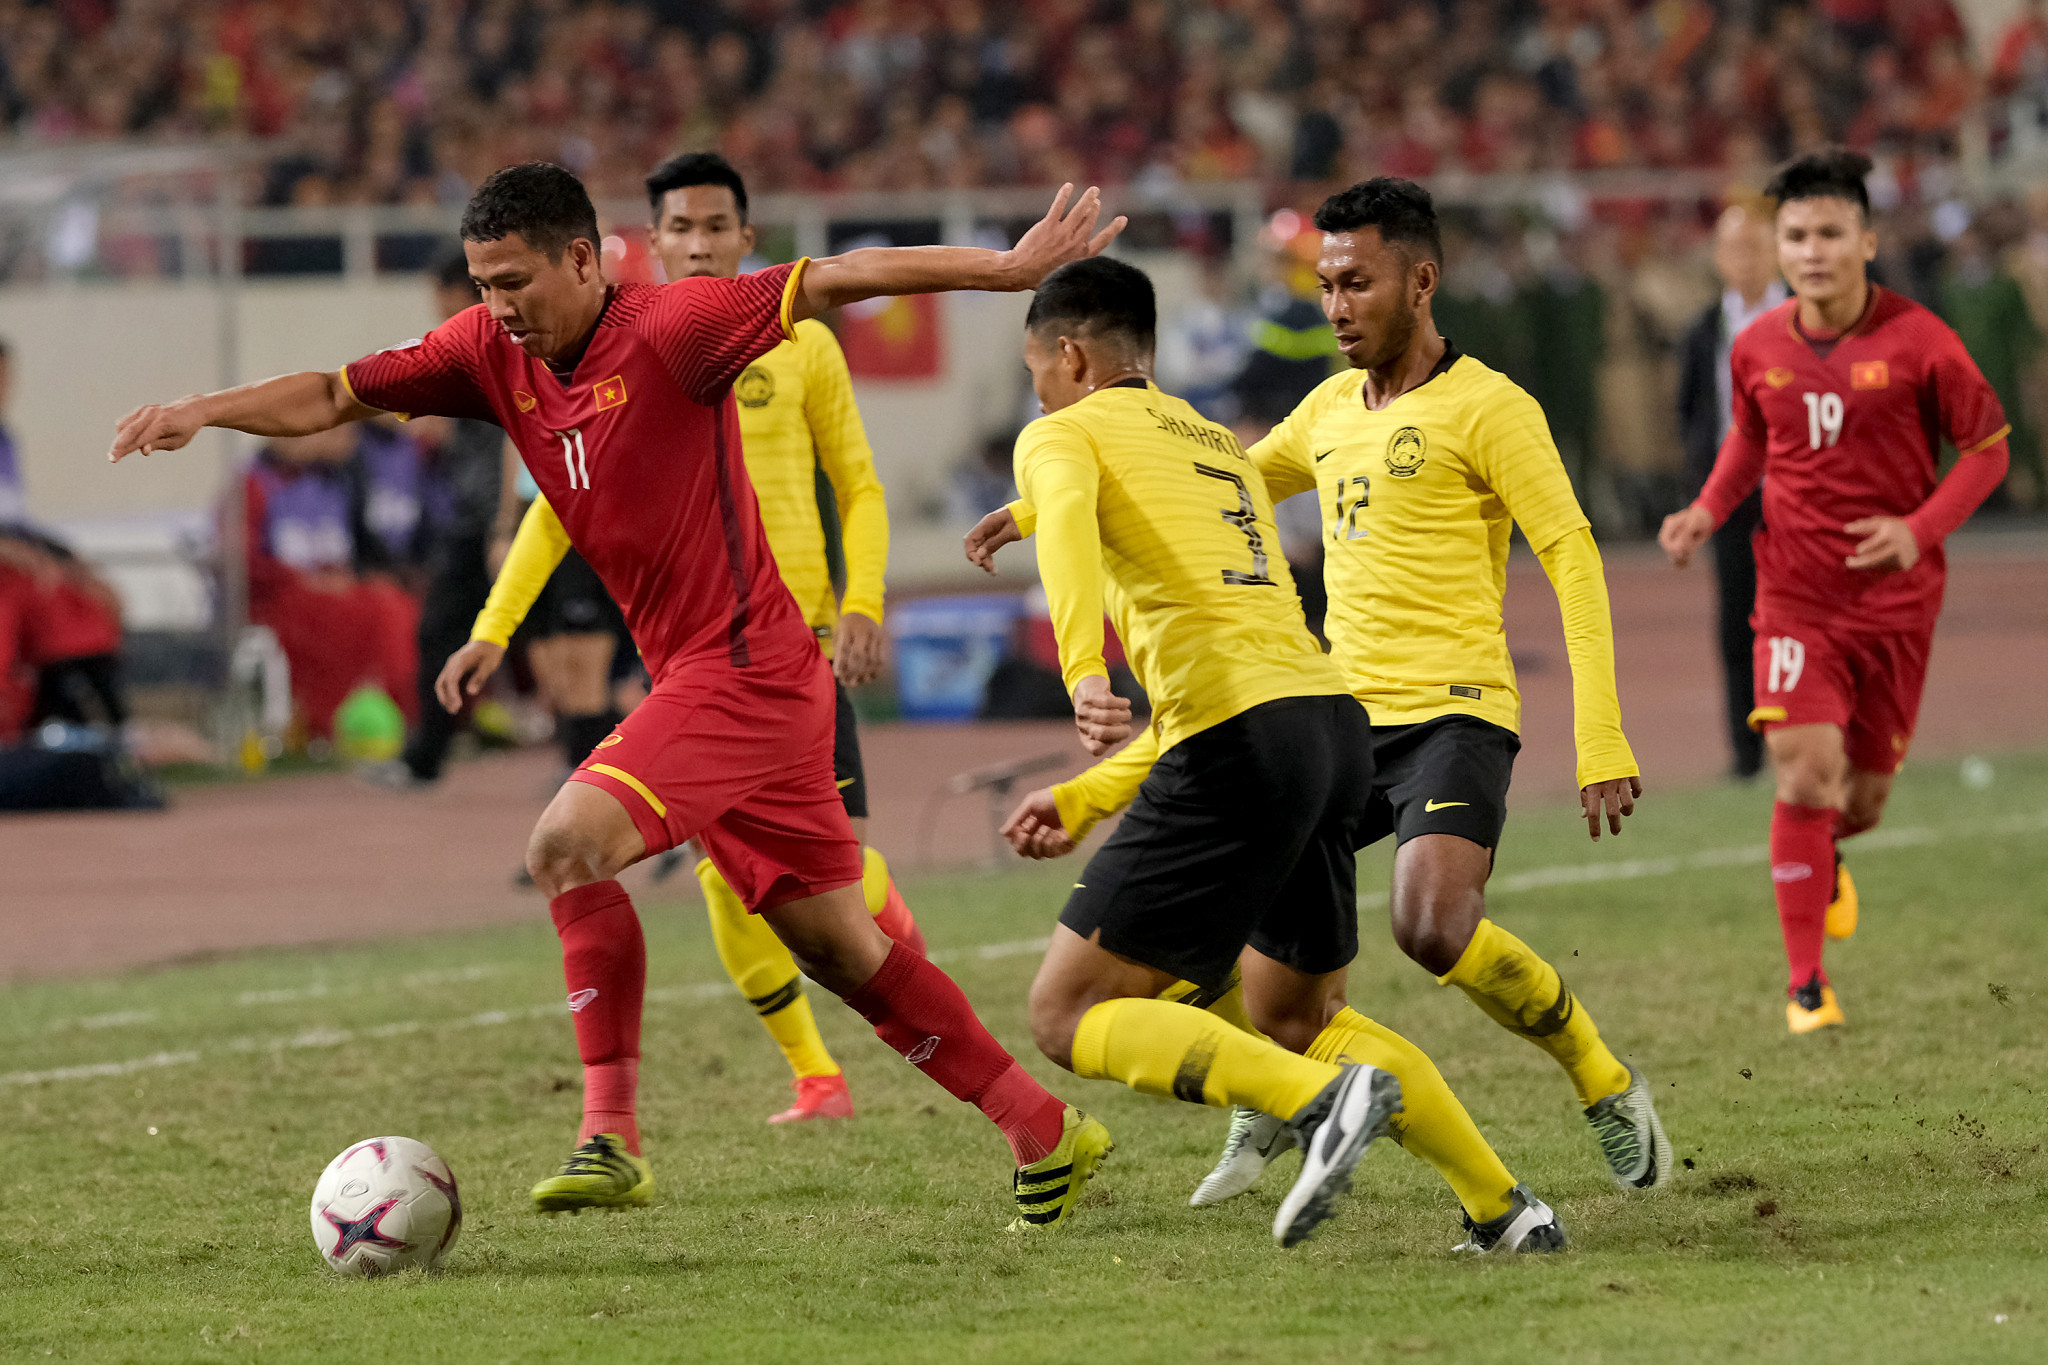 Suzuki Cup rescheduled for April and May under same format